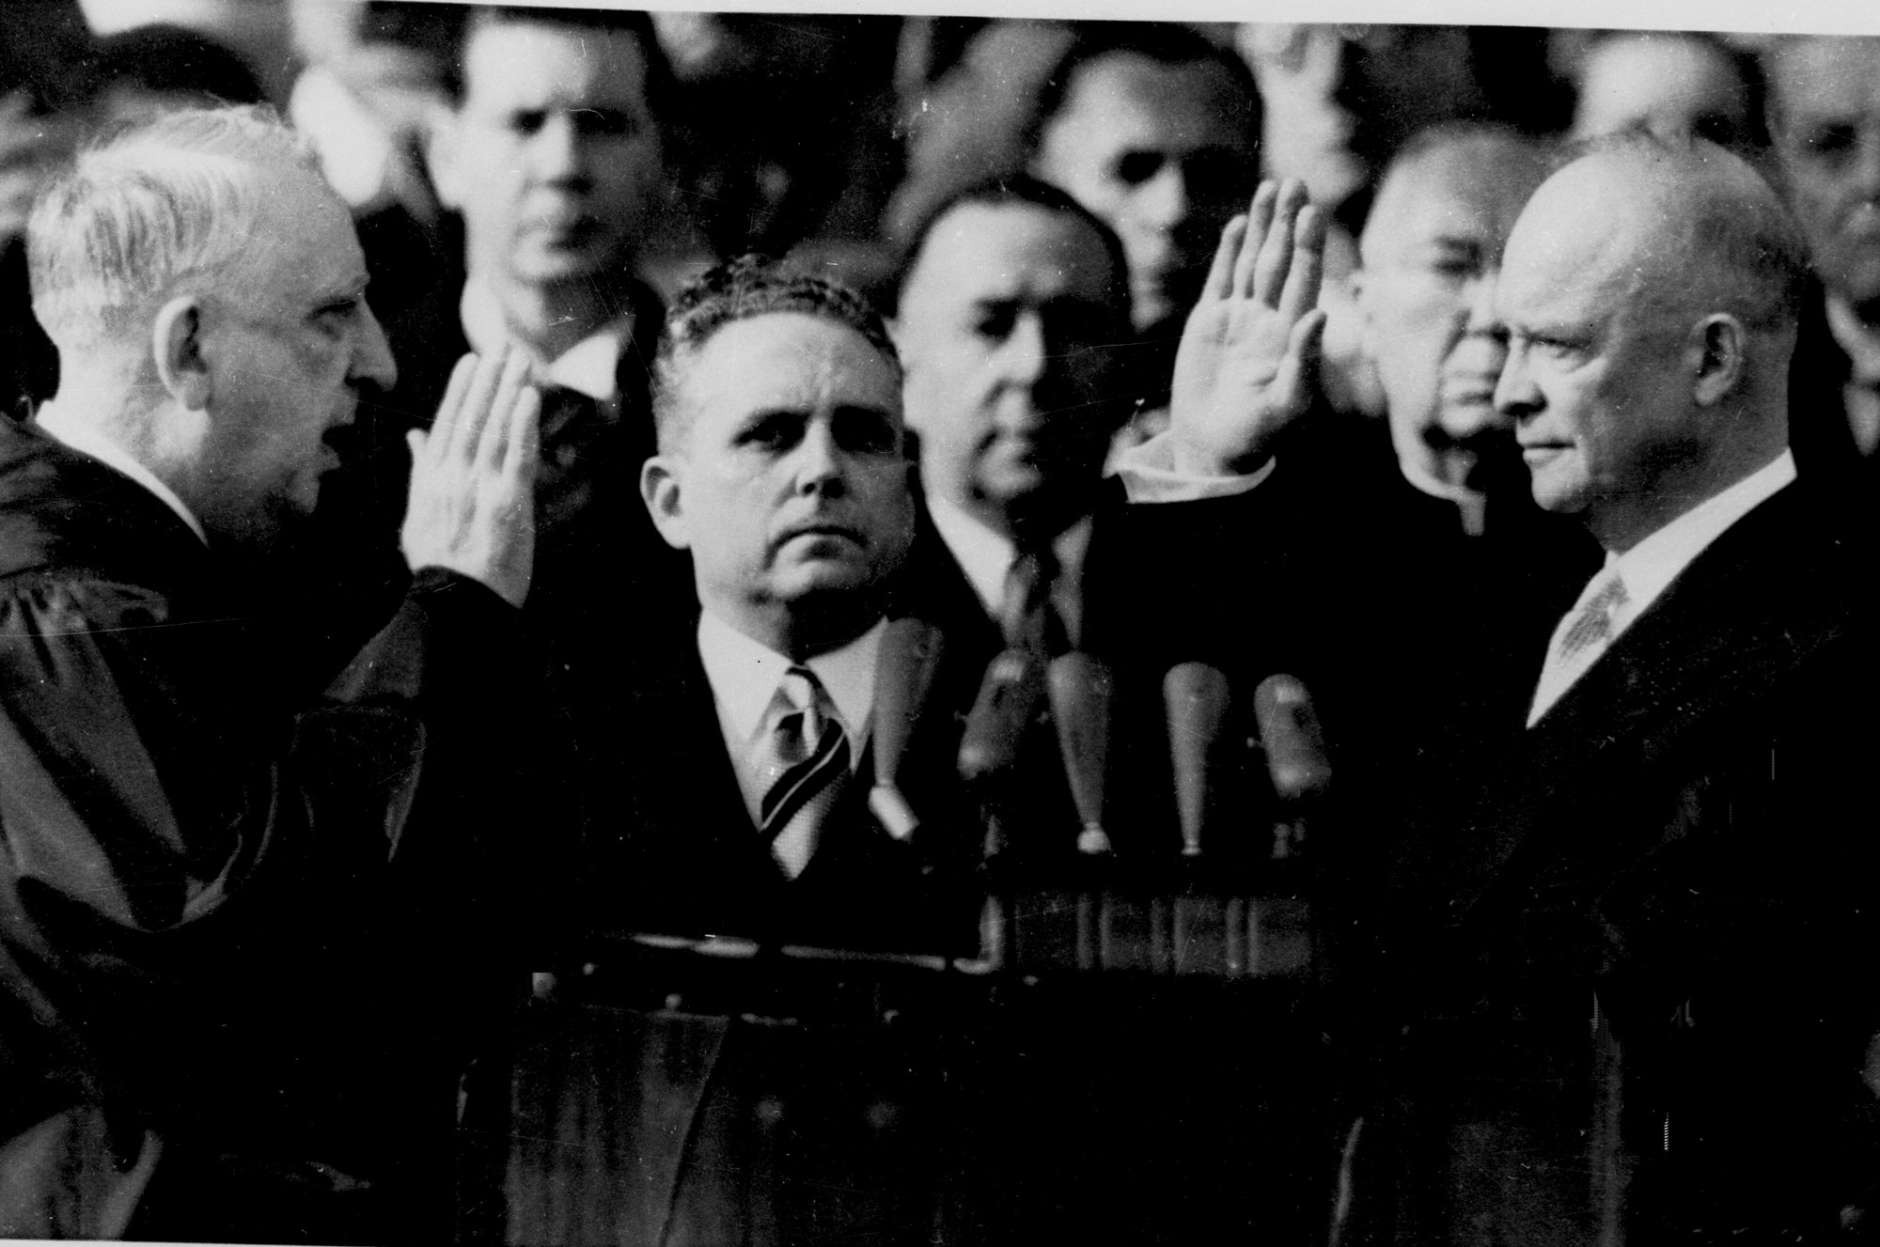 Dwight Eisenhower takes the oath of office January 20, 1953 as president of the United States. The oath is administered by Chief Justice Fred Vinson, left. Supreme Court Clerk Harold B. Willey is at center. (AP Photo)